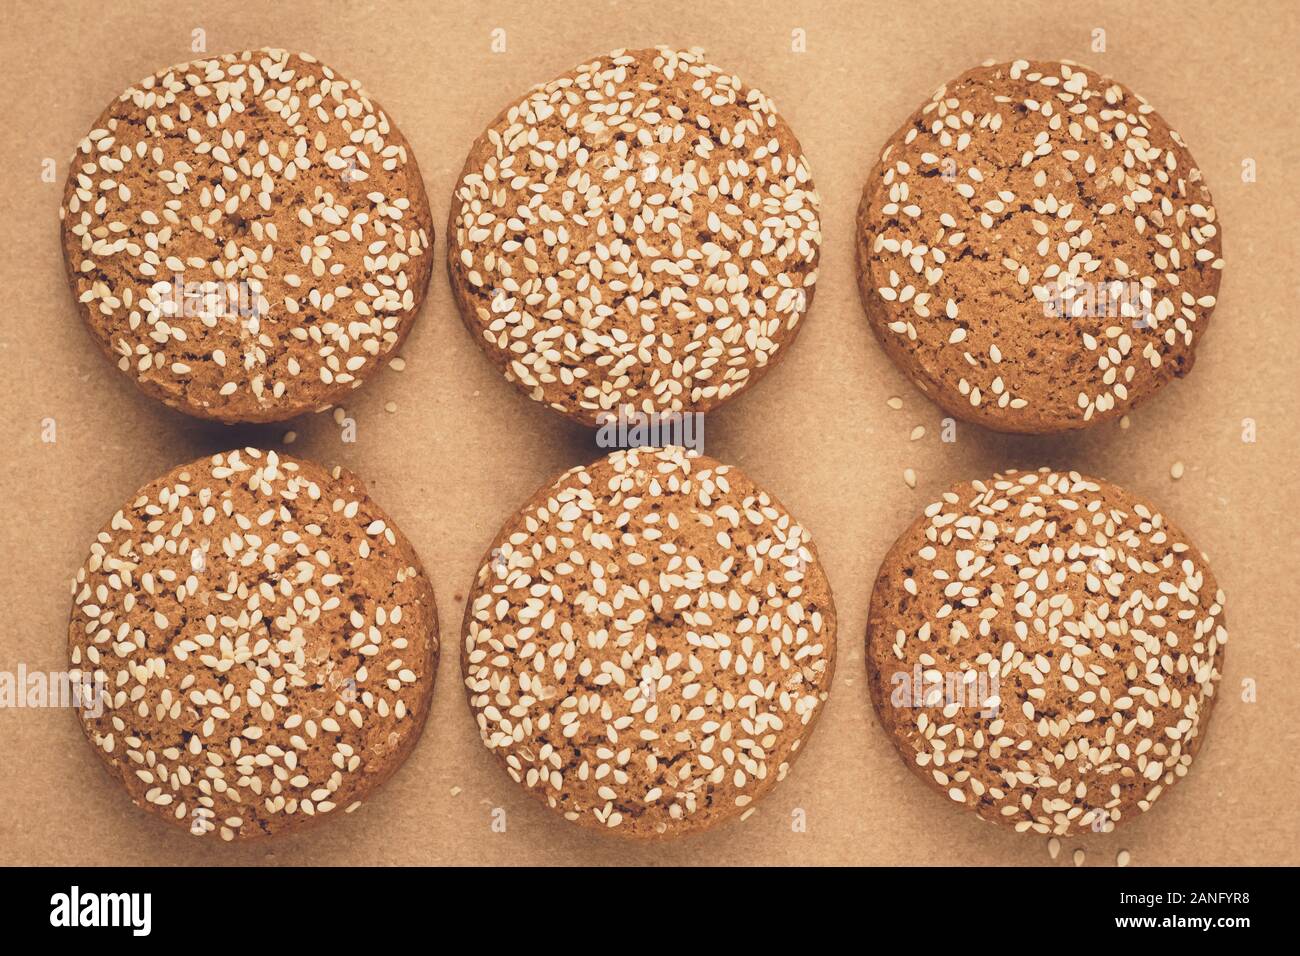 Oatmeal cookies on baking paper. Handmade bakery with sesame seeds. Brown background. A group of biscuits Stock Photo